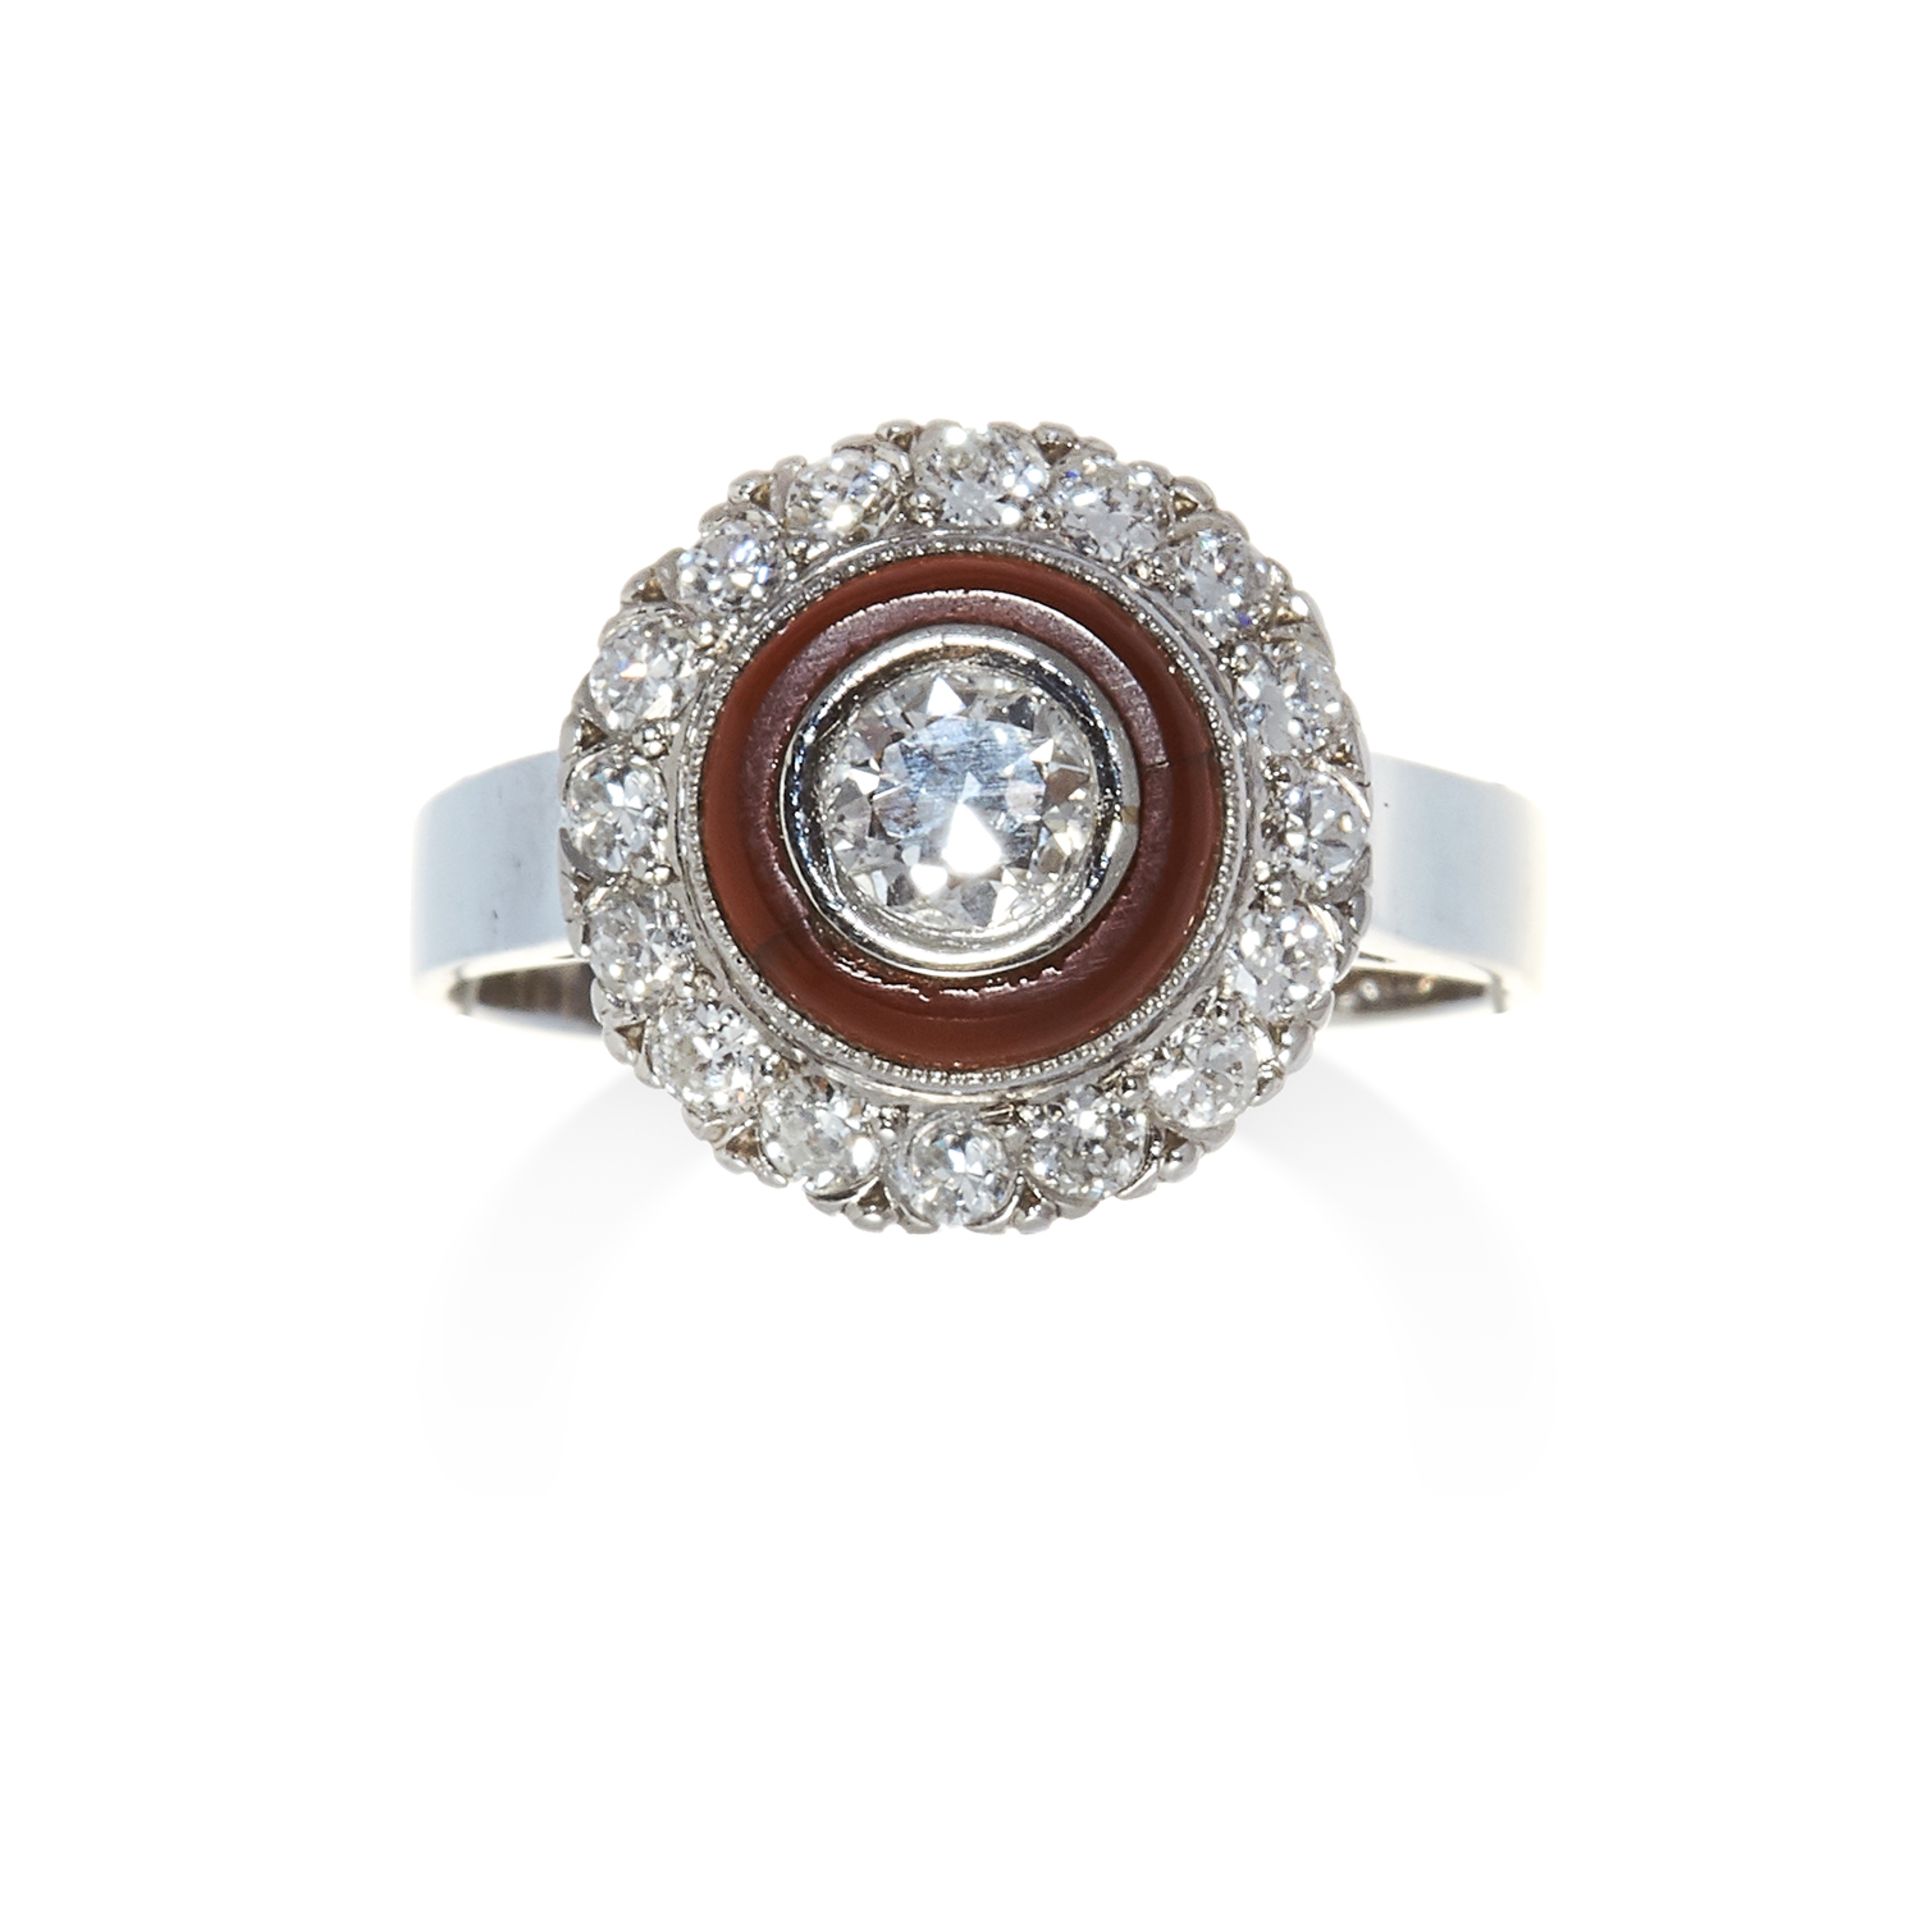 A DIAMOND AND HARDSTONE RING in white gold, set with a central round cut diamond to a hardstone